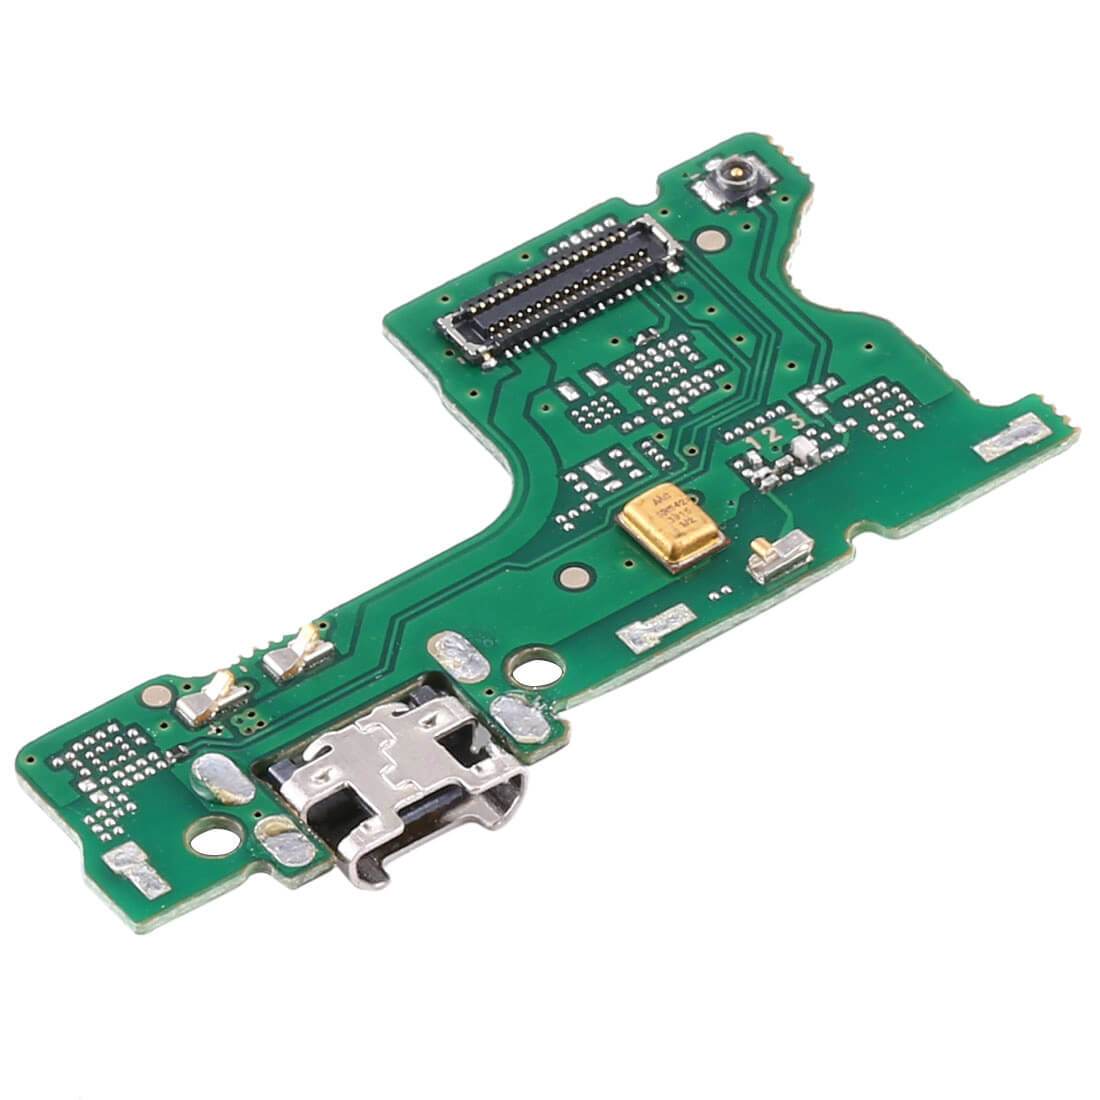 Replacement Charging Port Board For Huawei Y7 2019